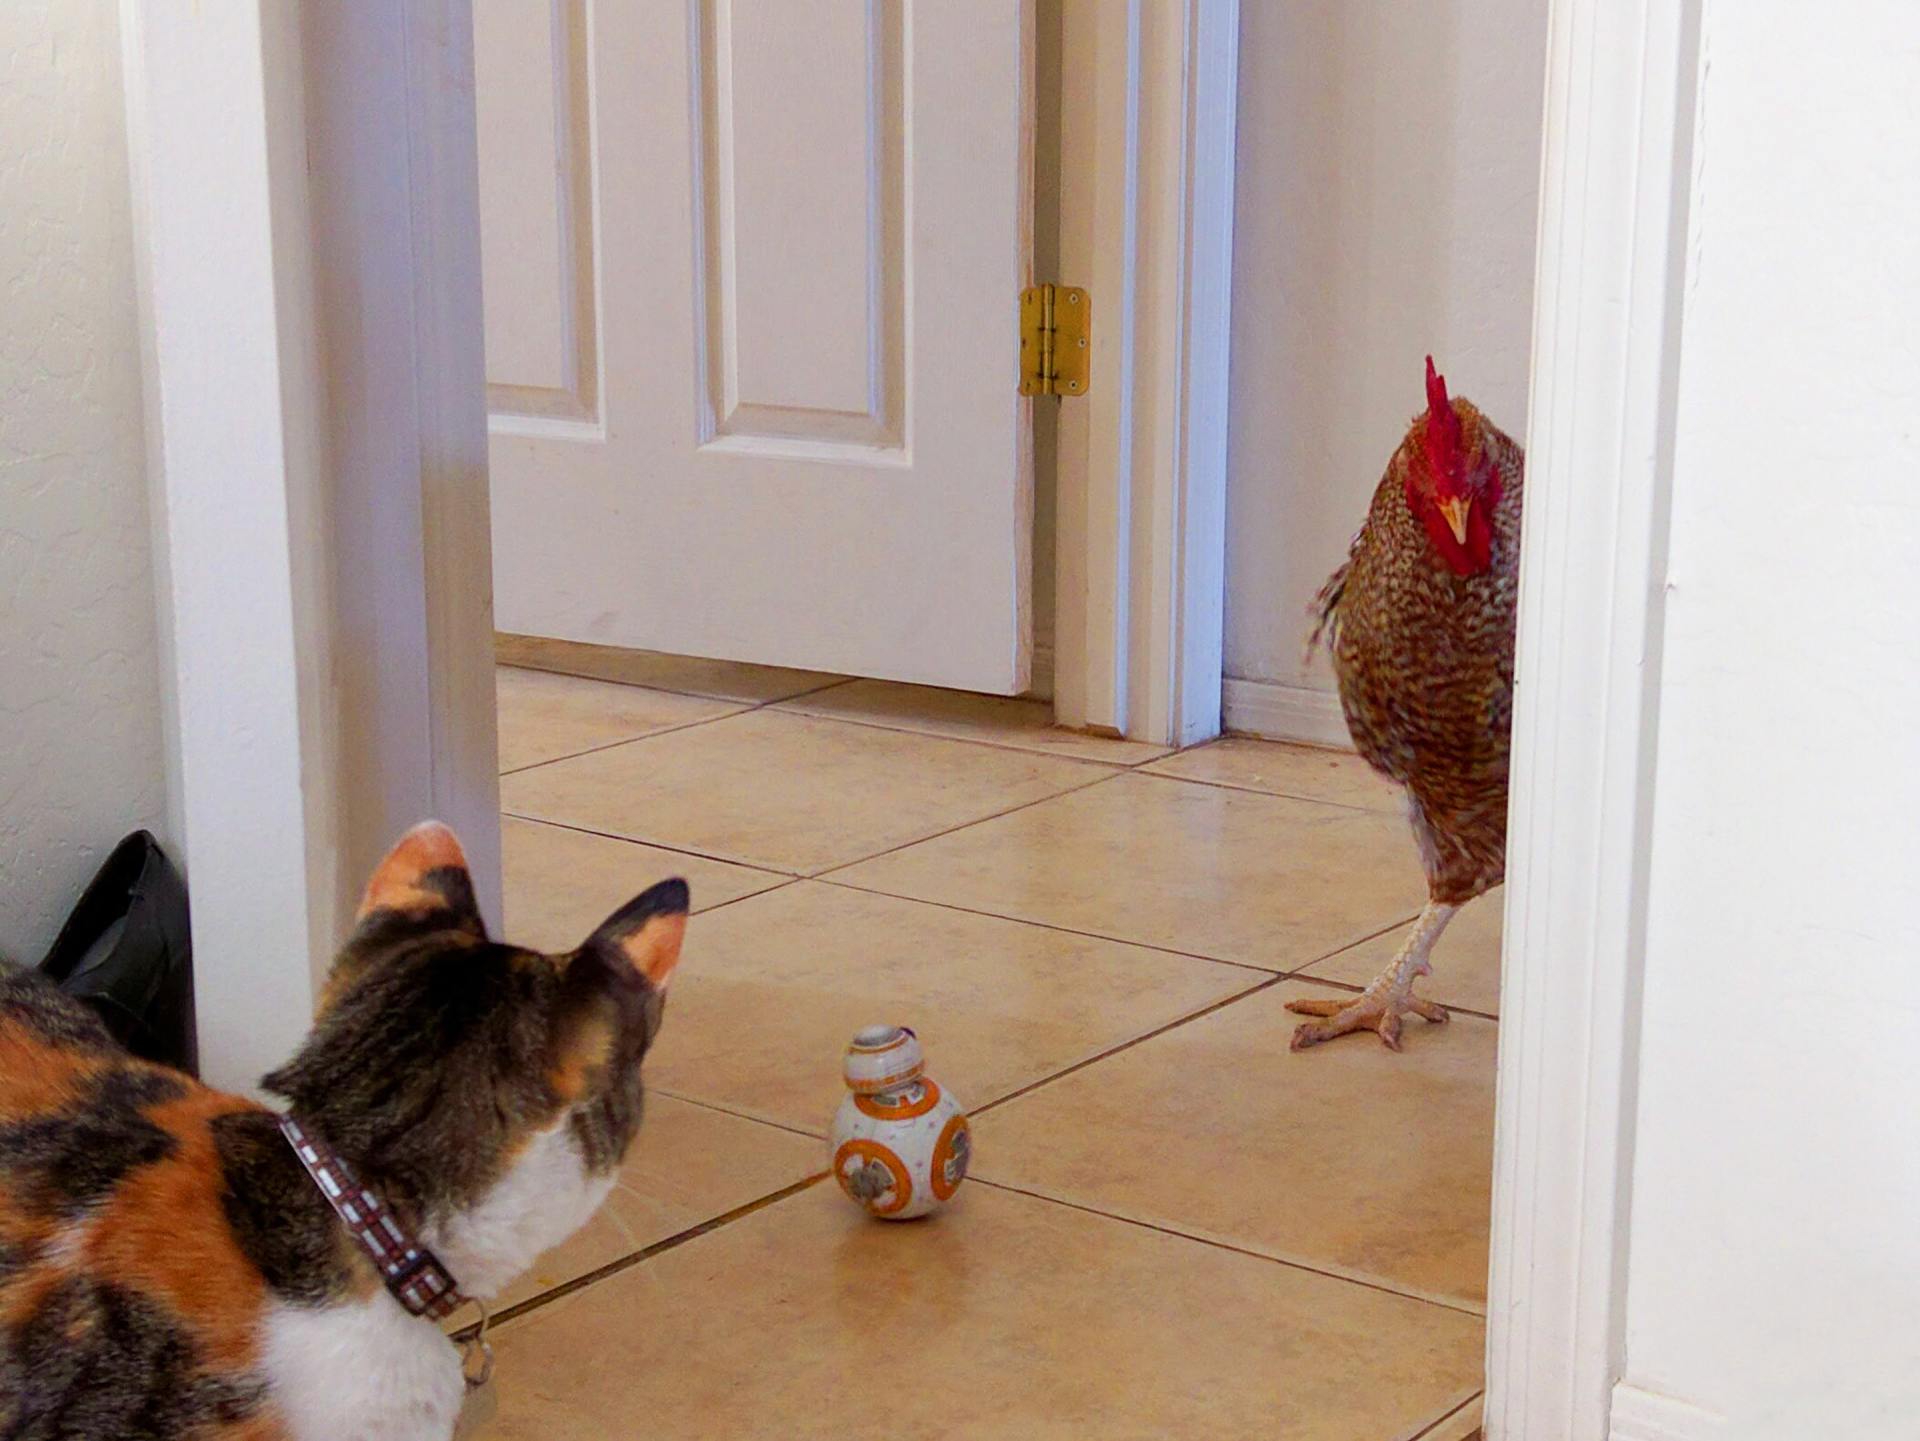 cat and chicken in a kitchen with tile flooring